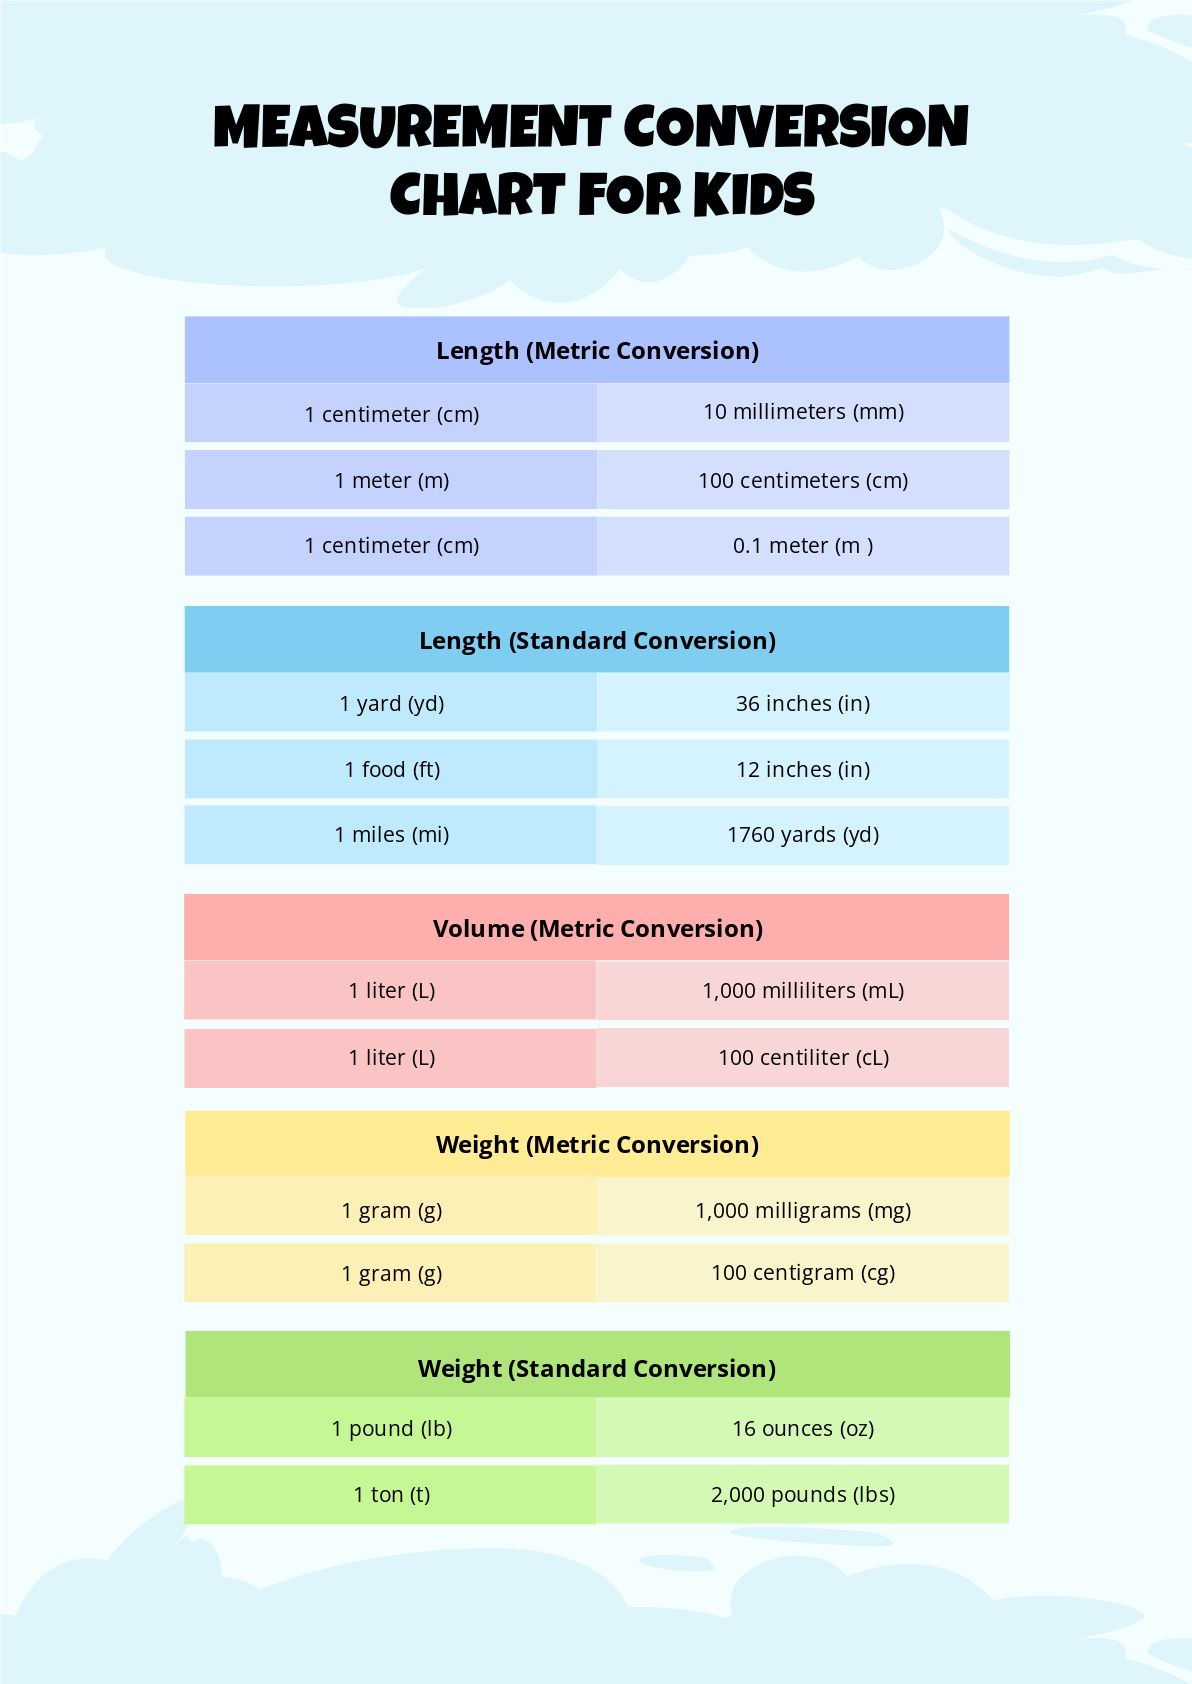 Measurement Conversion Chart For Kids in PDF